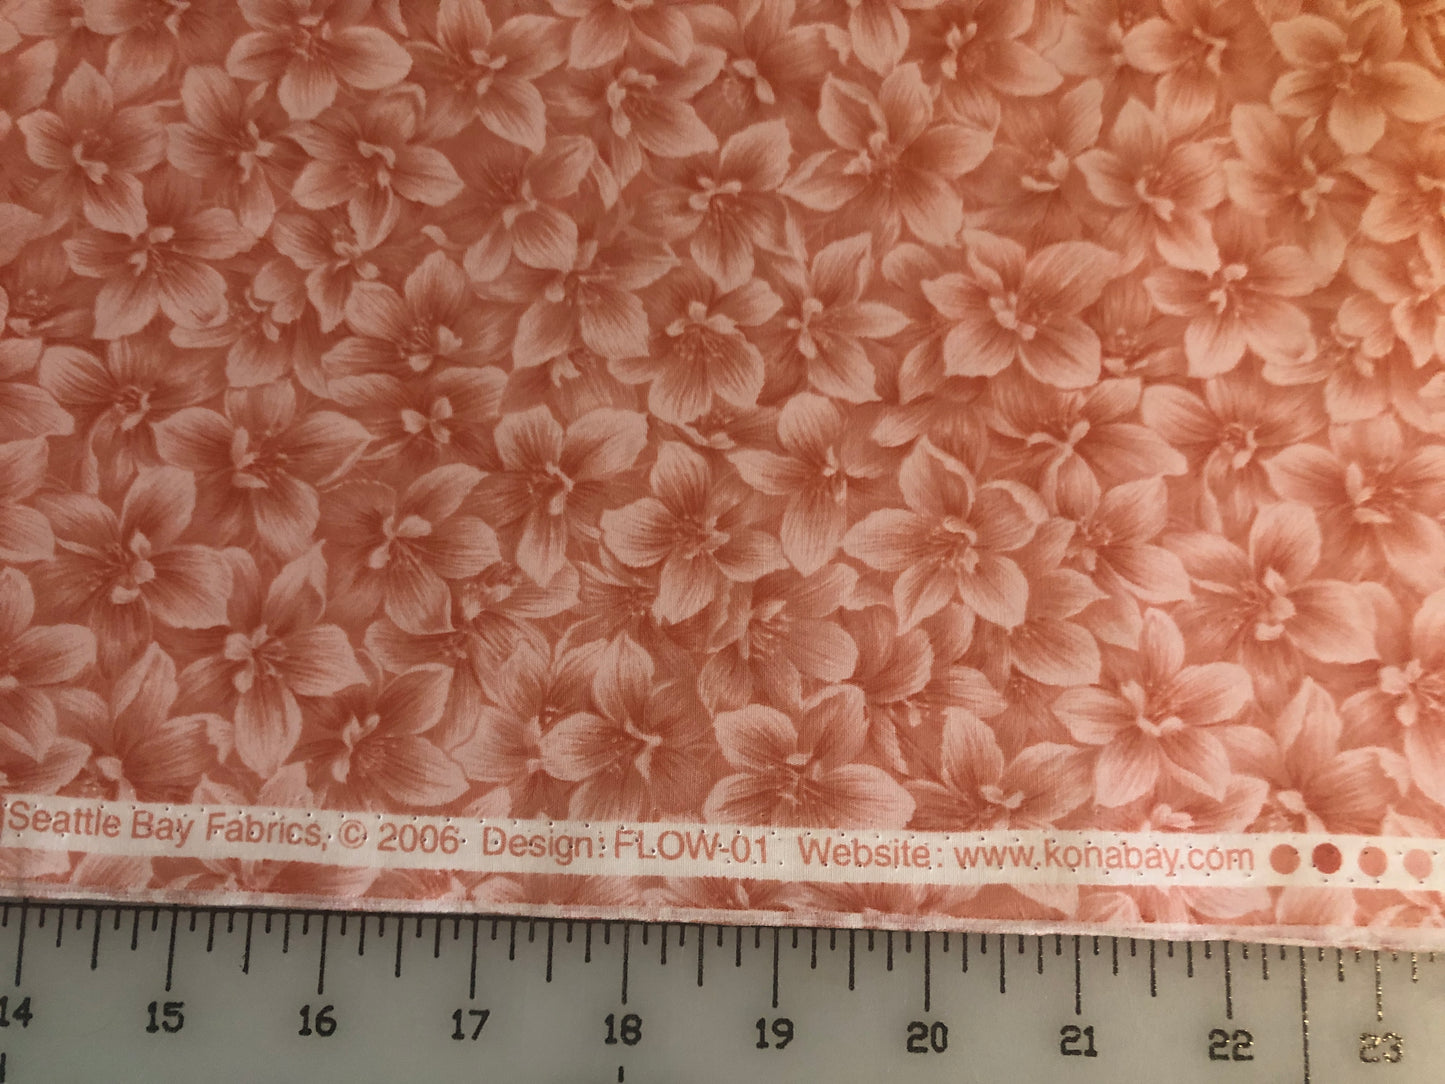 Floral Peach Cotton Quilting Fabric by Seattle Bay Fabrics